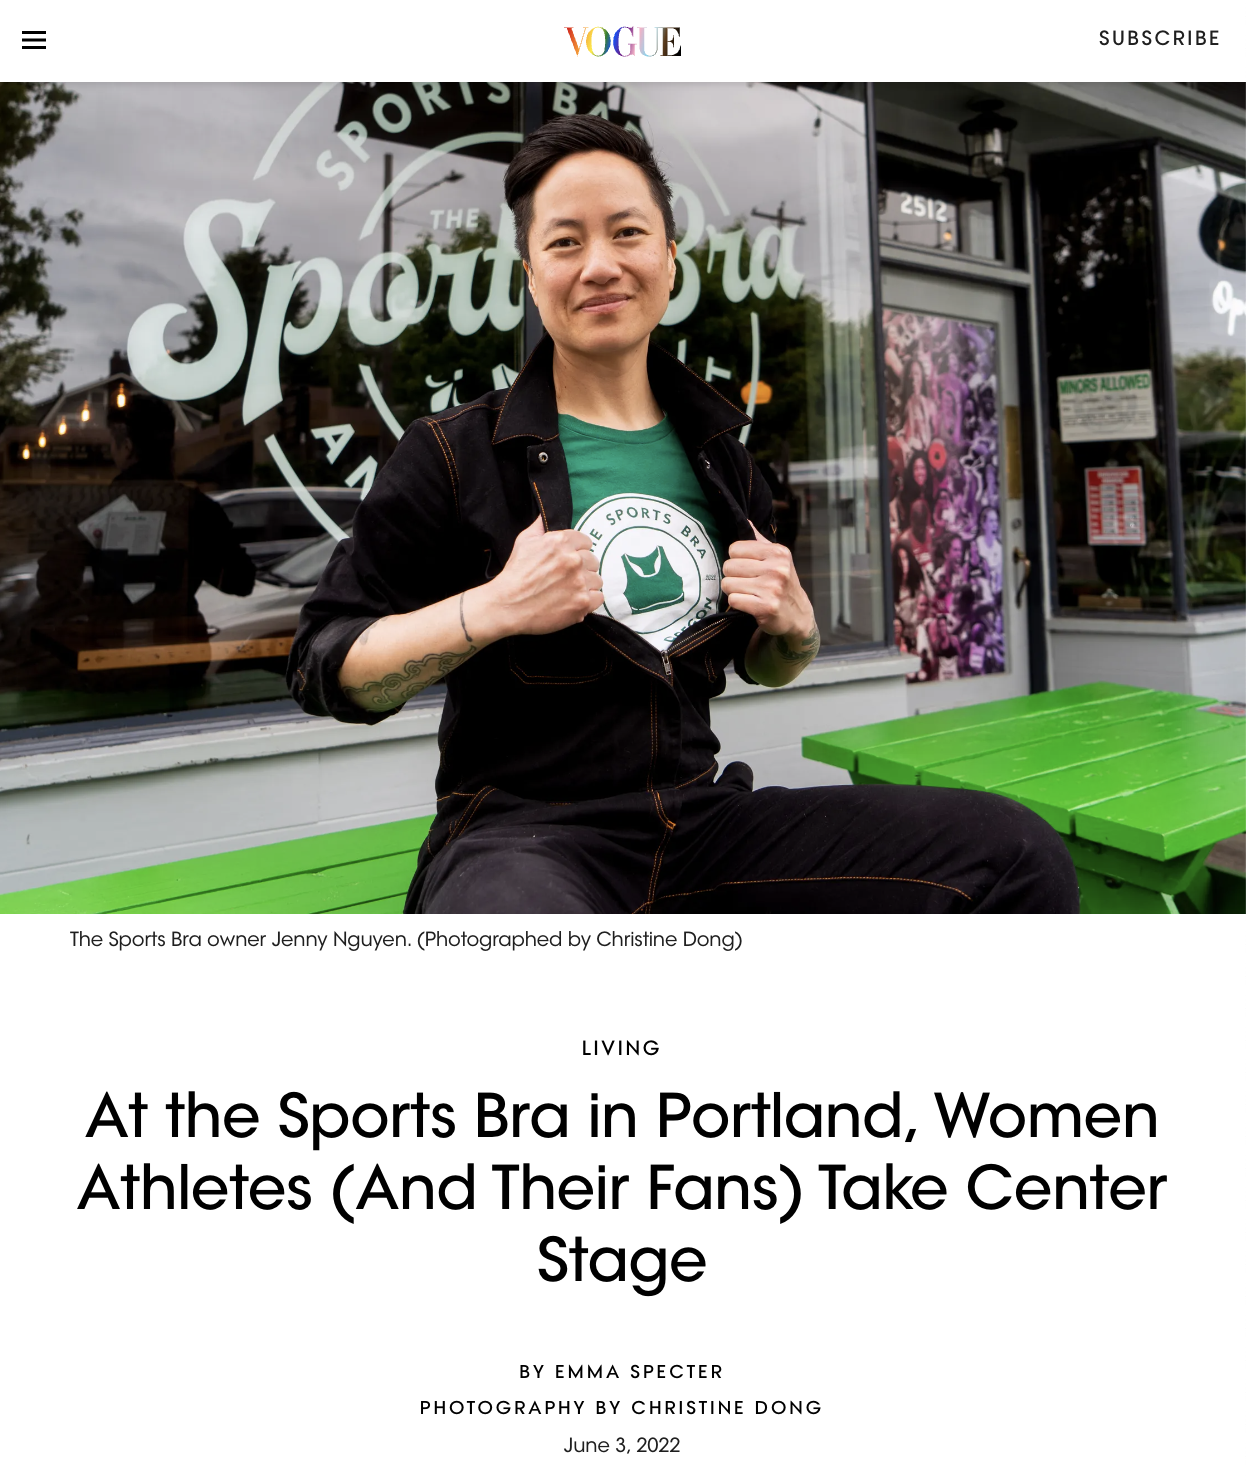 At the Sports Bra in Portland, Women Athletes (And Their Fans